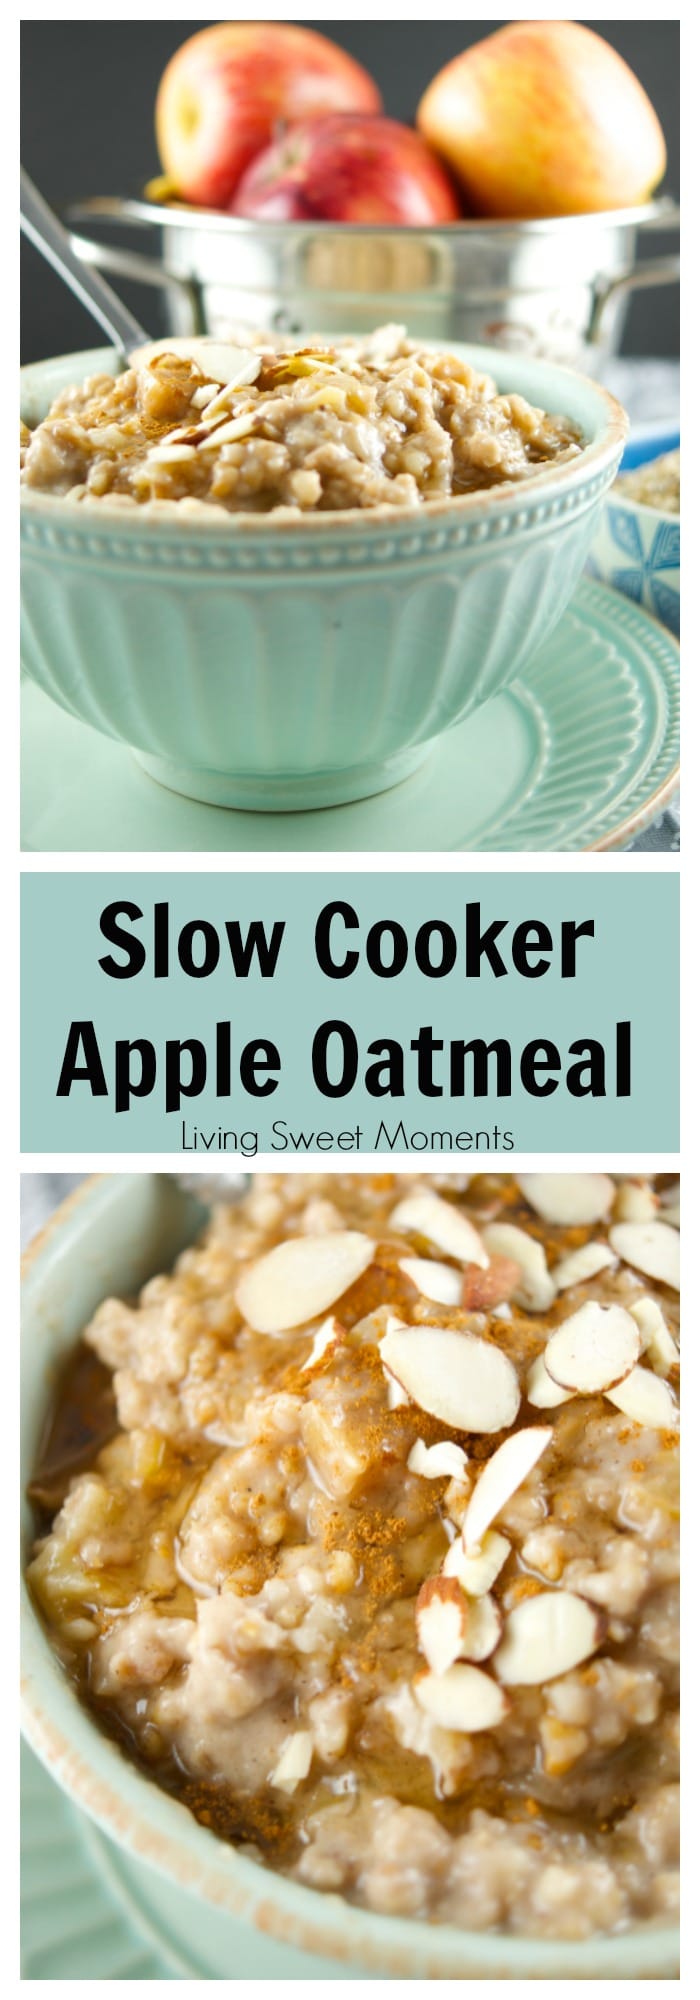 This delicious Slow Cooker Apple Oatmeal cooks overnight. It's vegan, healthy and full of flavor. Wake up to a hot bowl of apple pie oatmeal full of spice